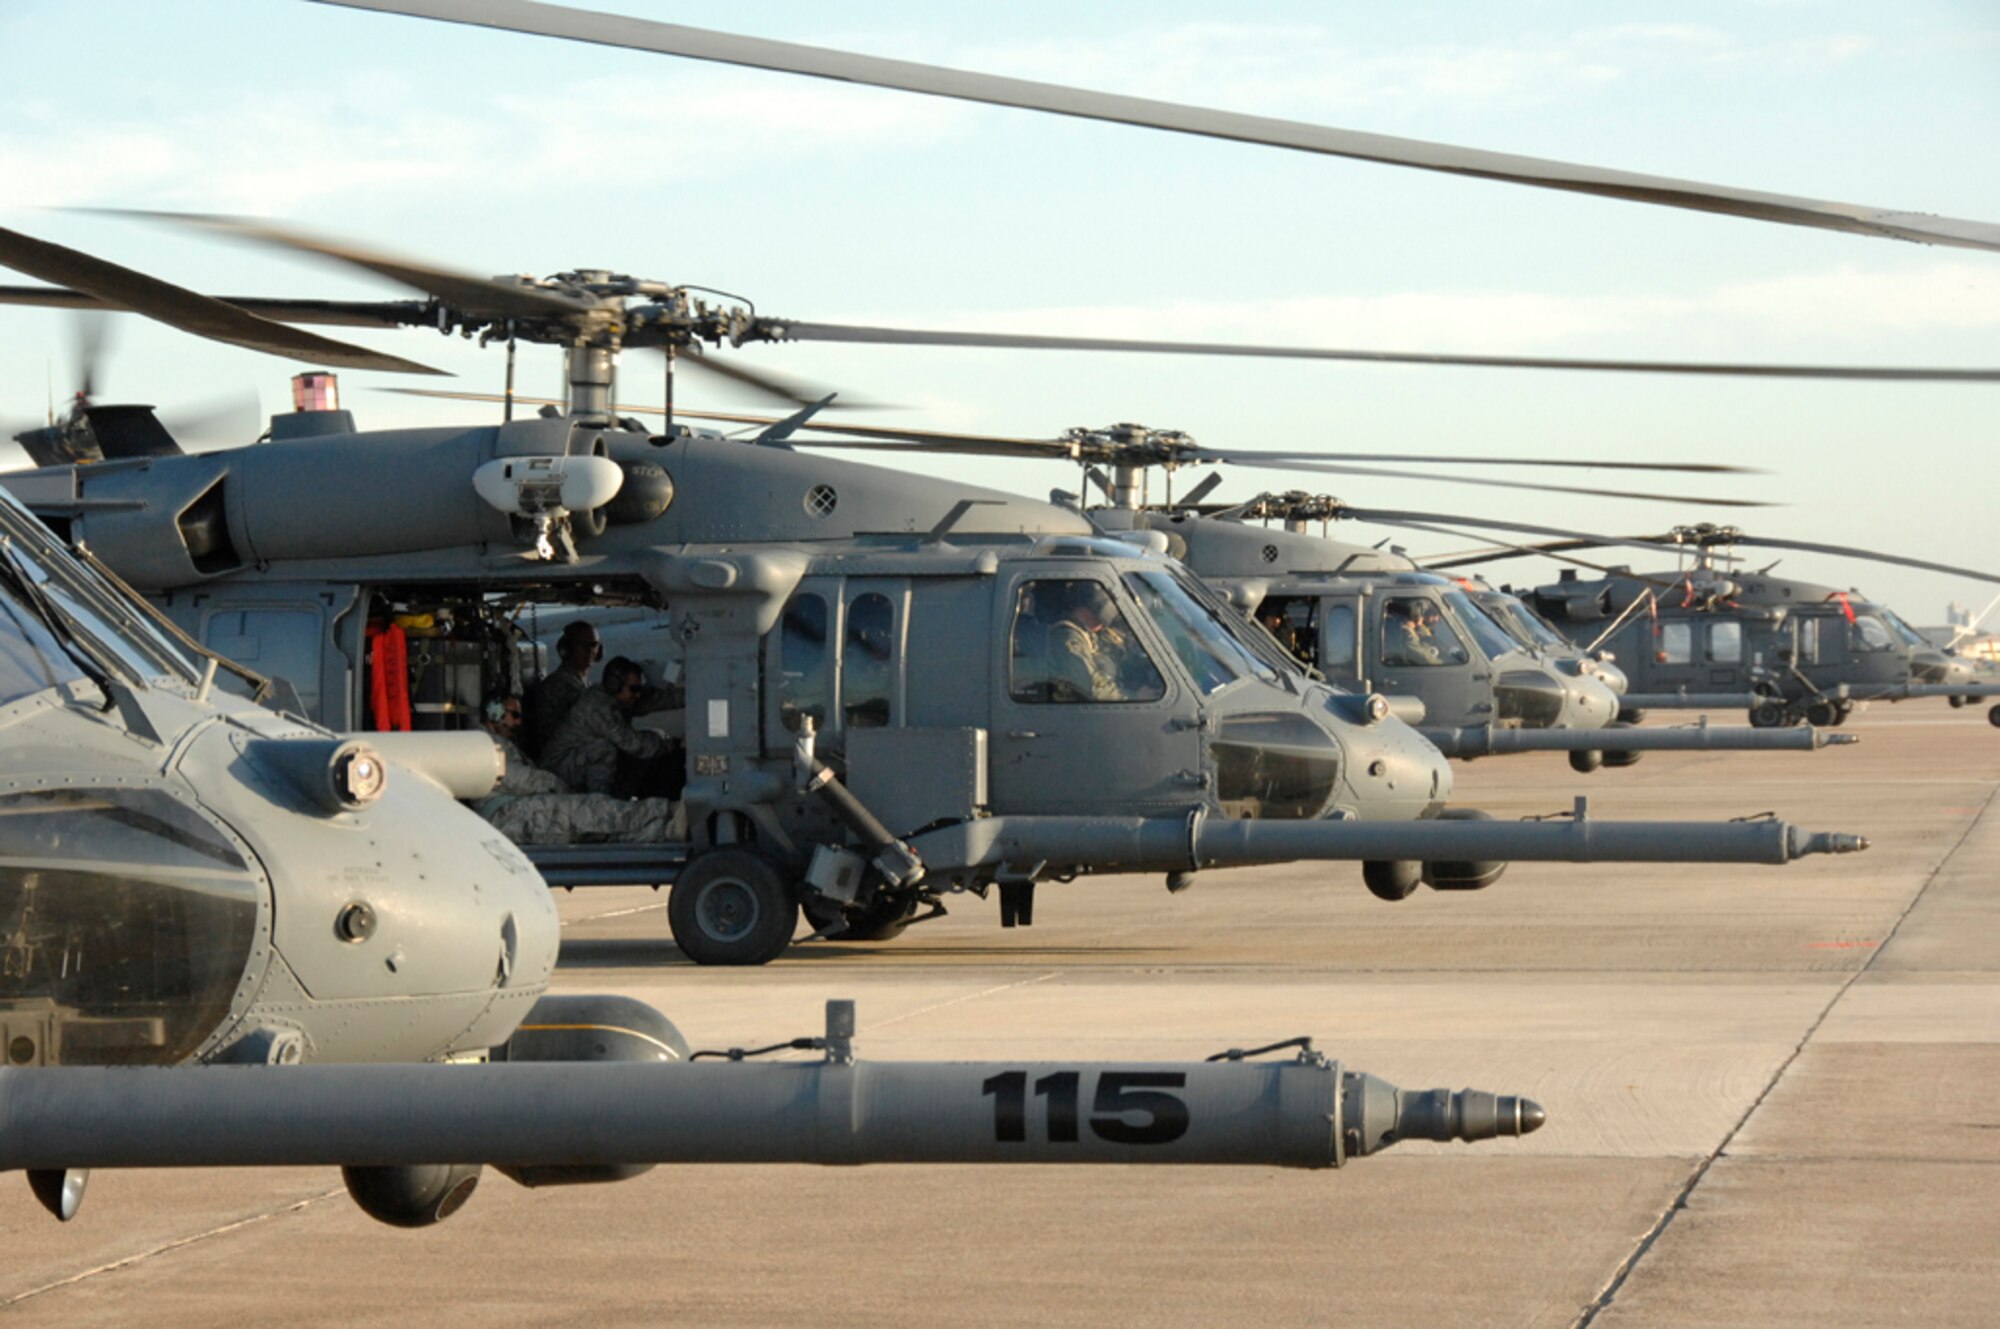 A line of HH-60G Pave Hawks from the 943rd Rescue Group, Davis-Monthan Air Force Base, Ariz., 176th Wing, Kulis Air National Guard Base, Alaska, and 129th Rescue Wing, Moffett Federal Airfield, Calif., sit on the flightline at Ellington Field, Texas, Sept. 3. The U.S. Air Force and Air National Guard aircraft and personnel provided the governors of Louisiana and Texas air search and rescue assets for the response to Hurricane Gustav. (U.S. Air Force photo by Technical Sgt. Ray Aquino)